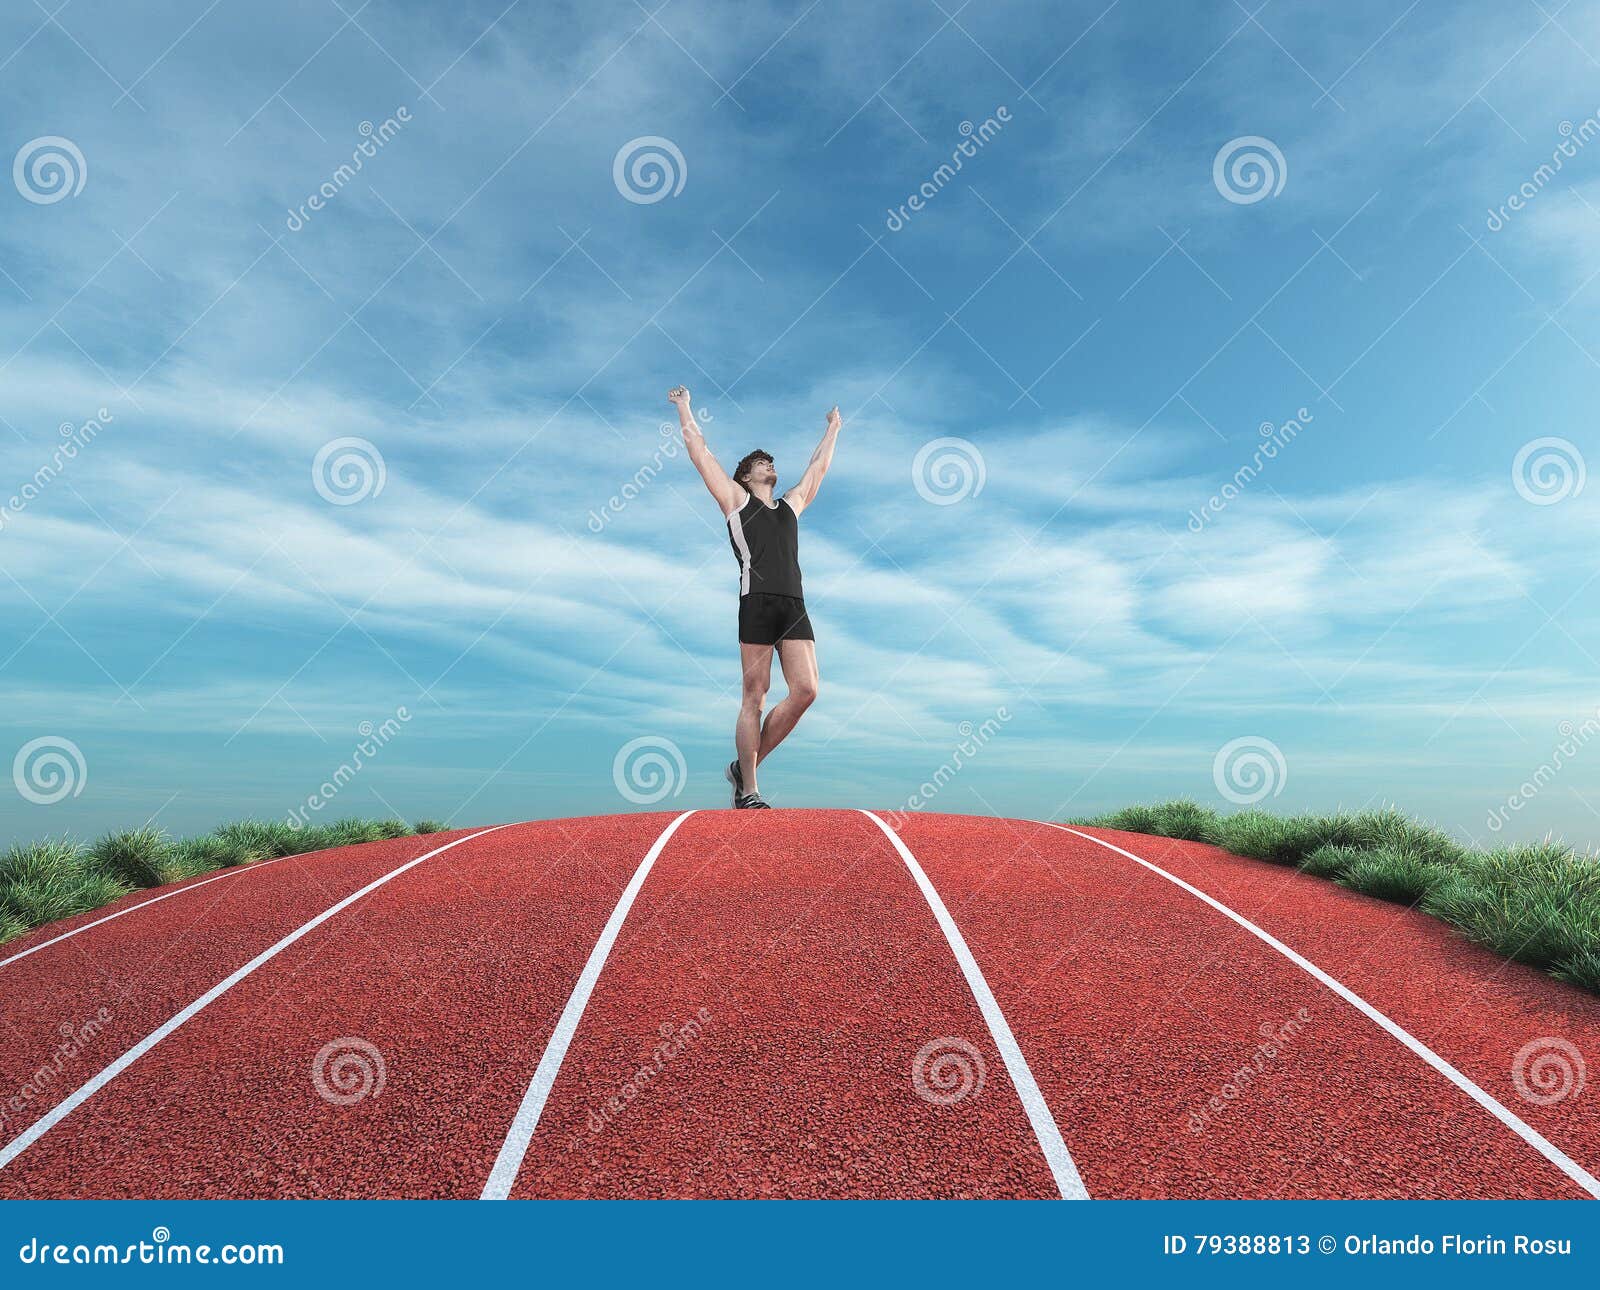 athlete runner rises his hands to the sky